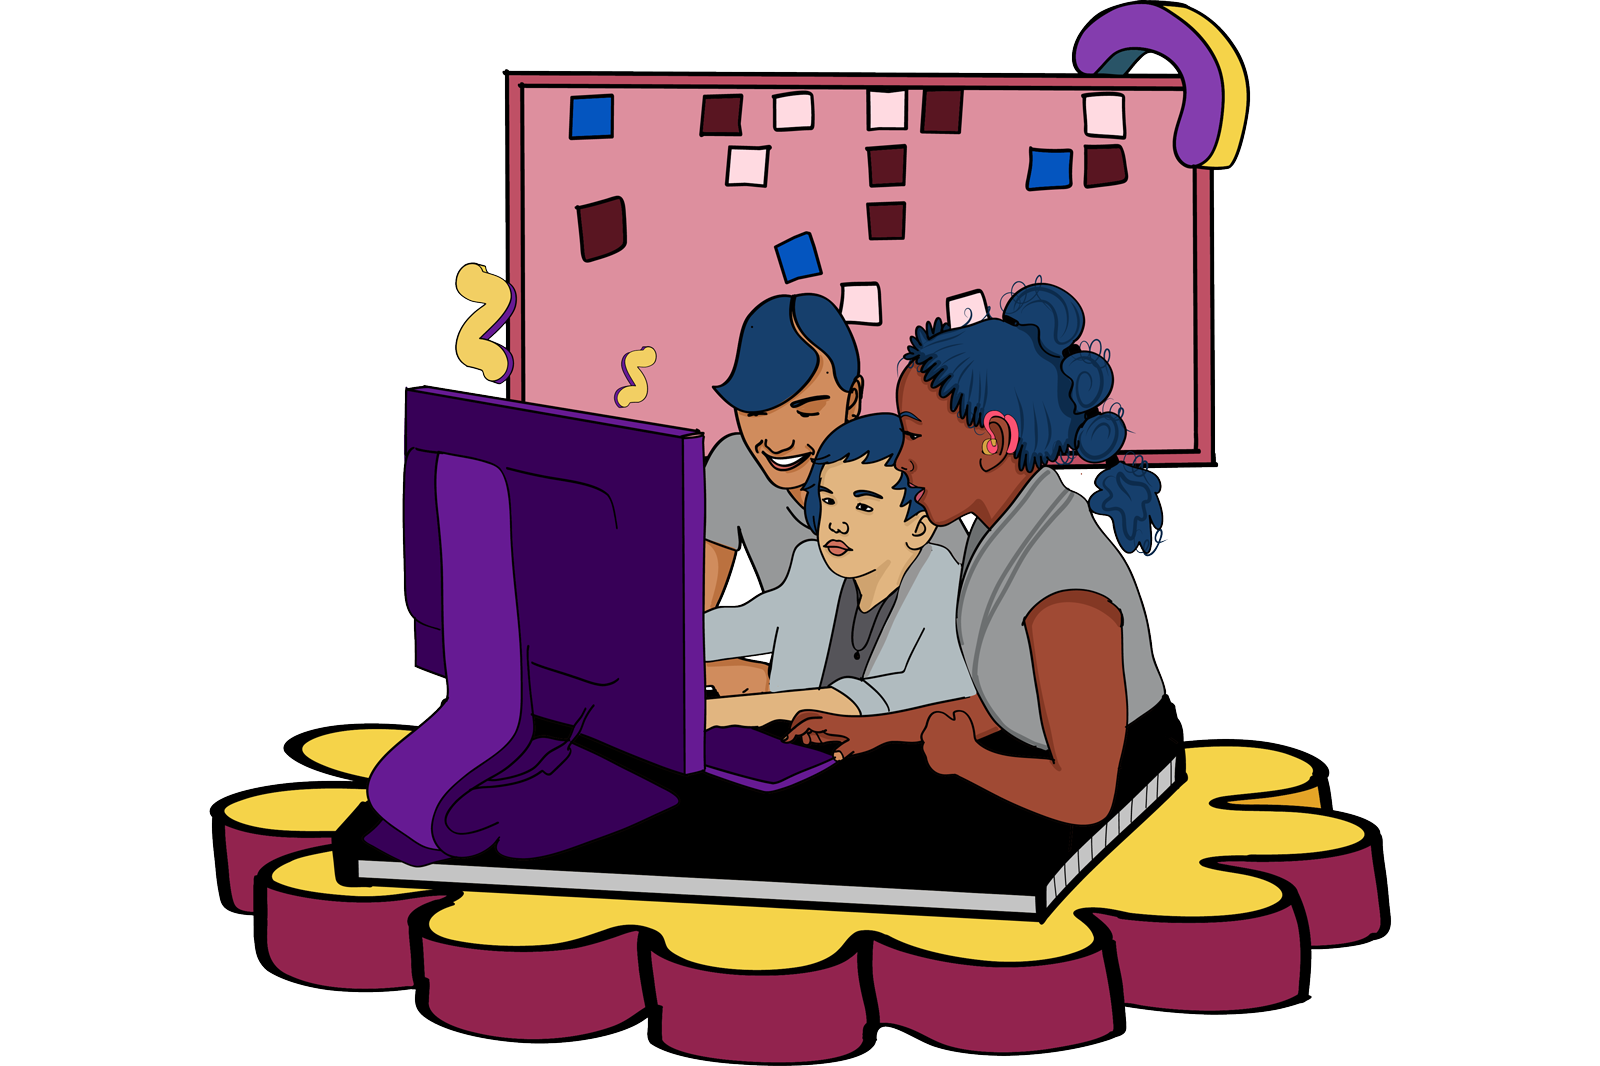 3 people looking at a computer screen